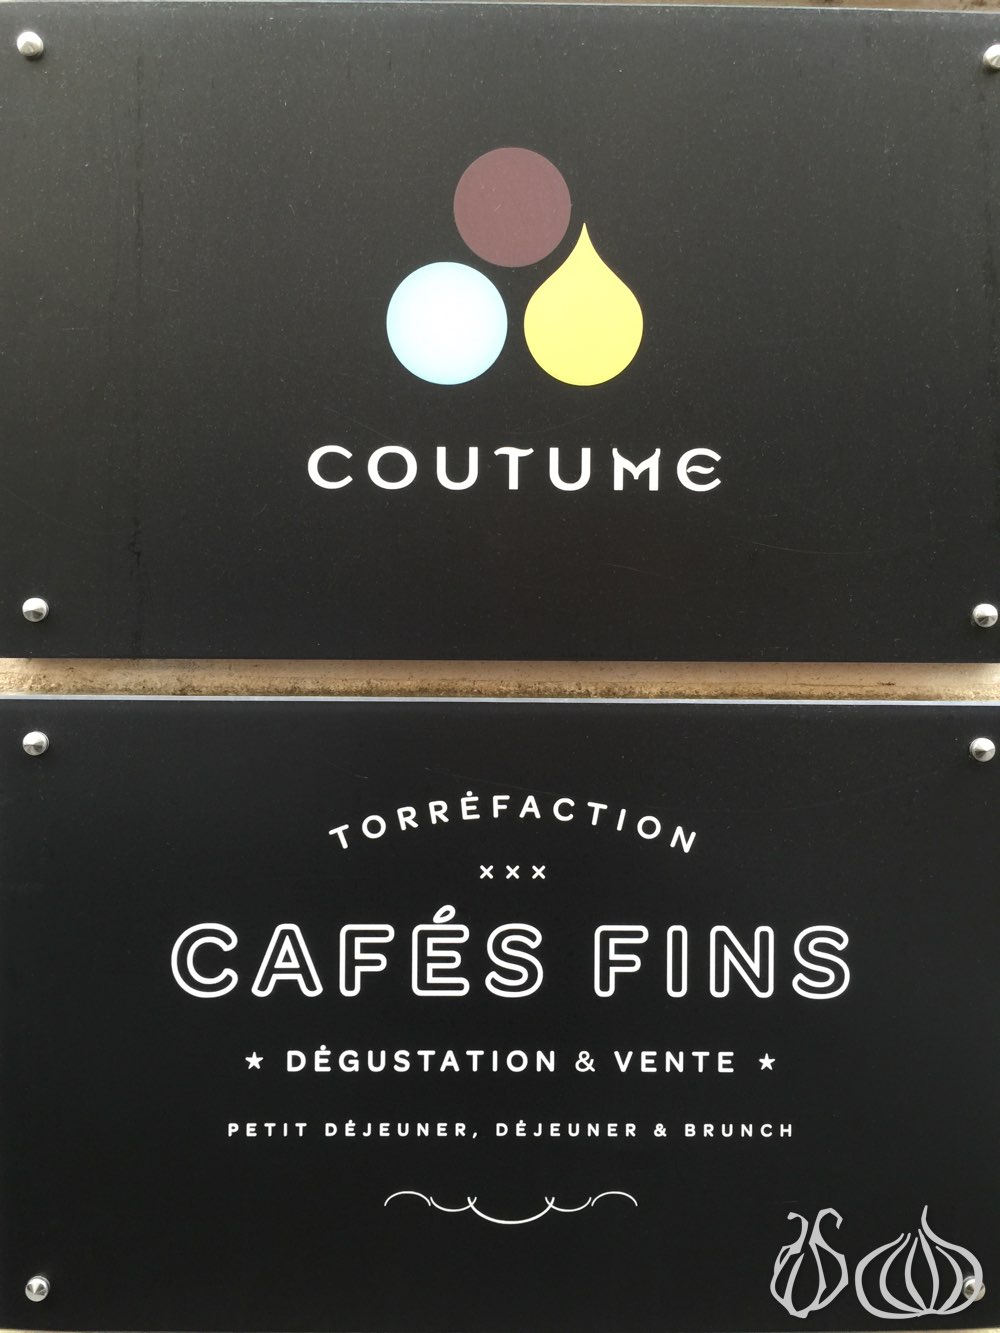 cafe-coutume252015-01-28-09-20-31